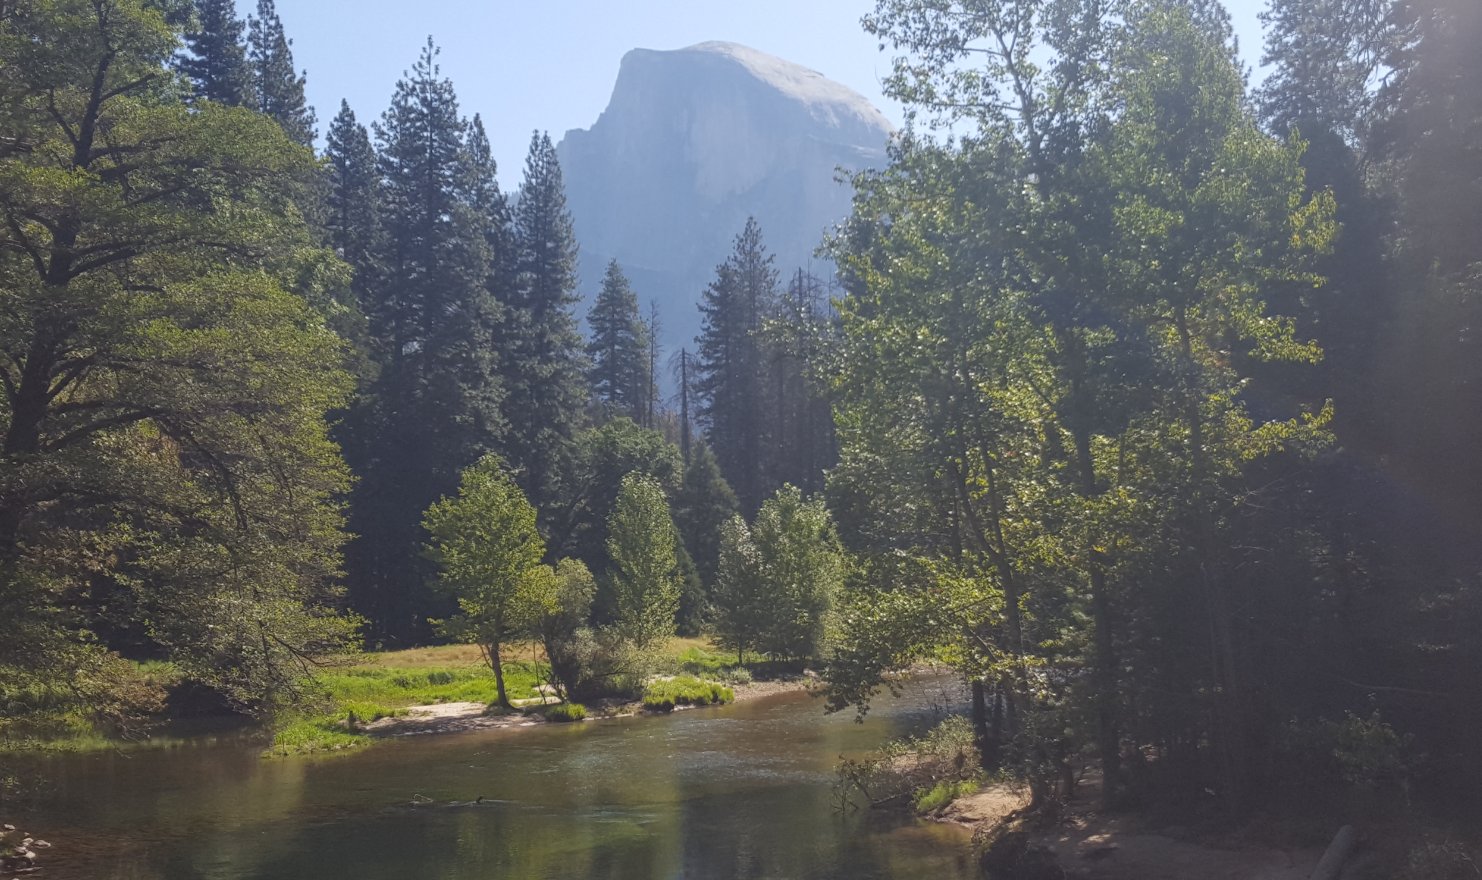 Halfdome from the valley floor